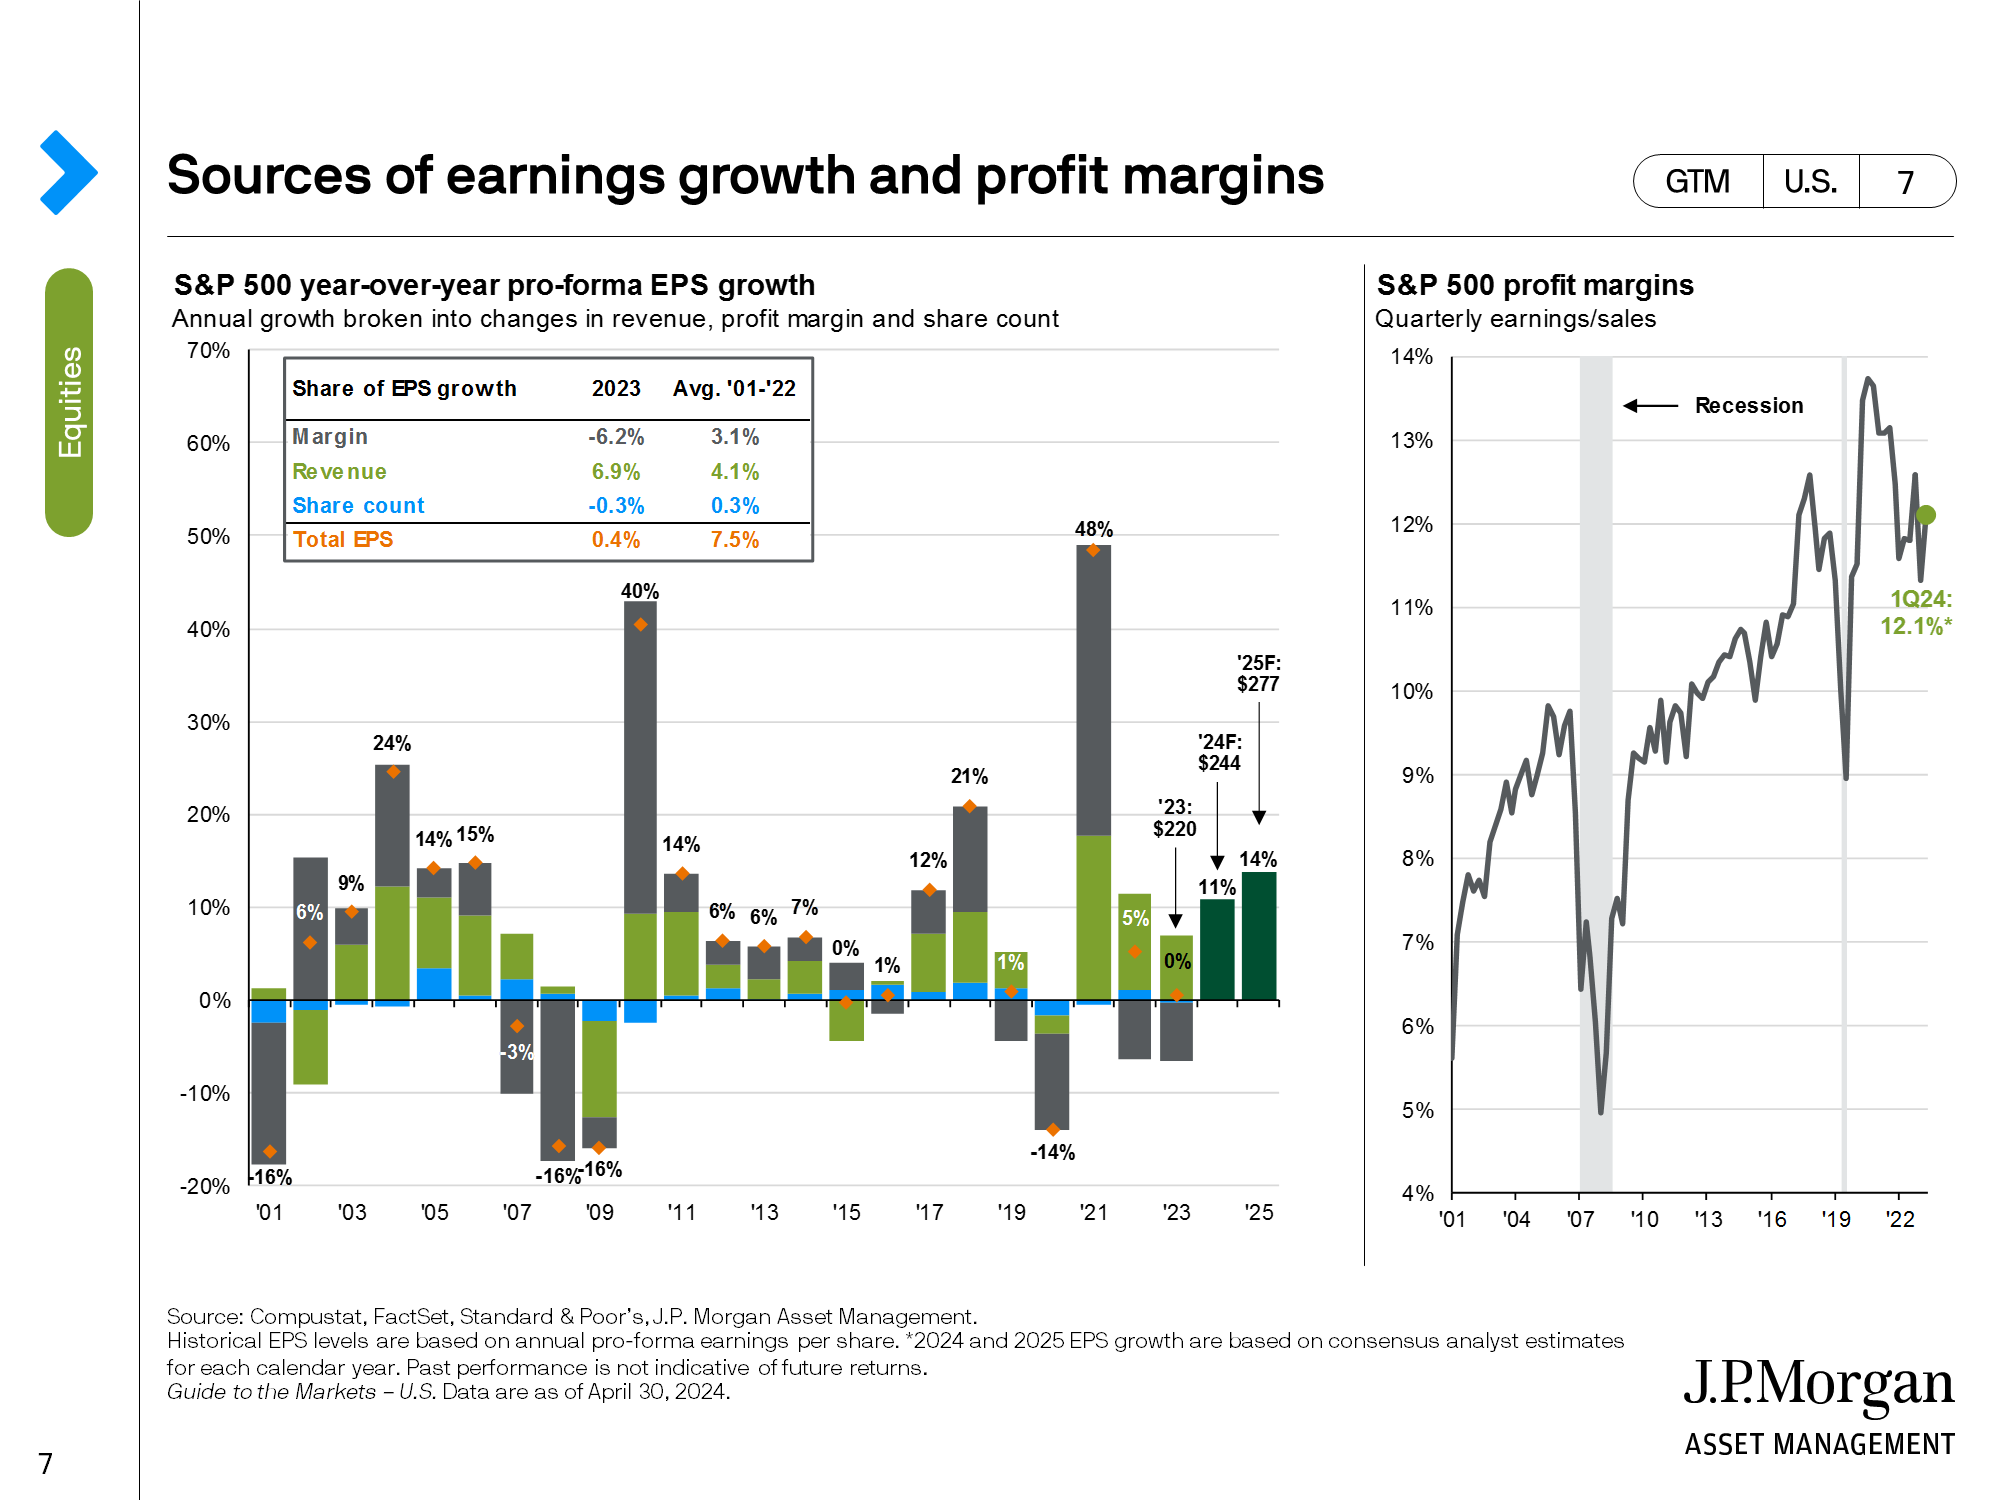 Corporate earnings and sources of earnings growth